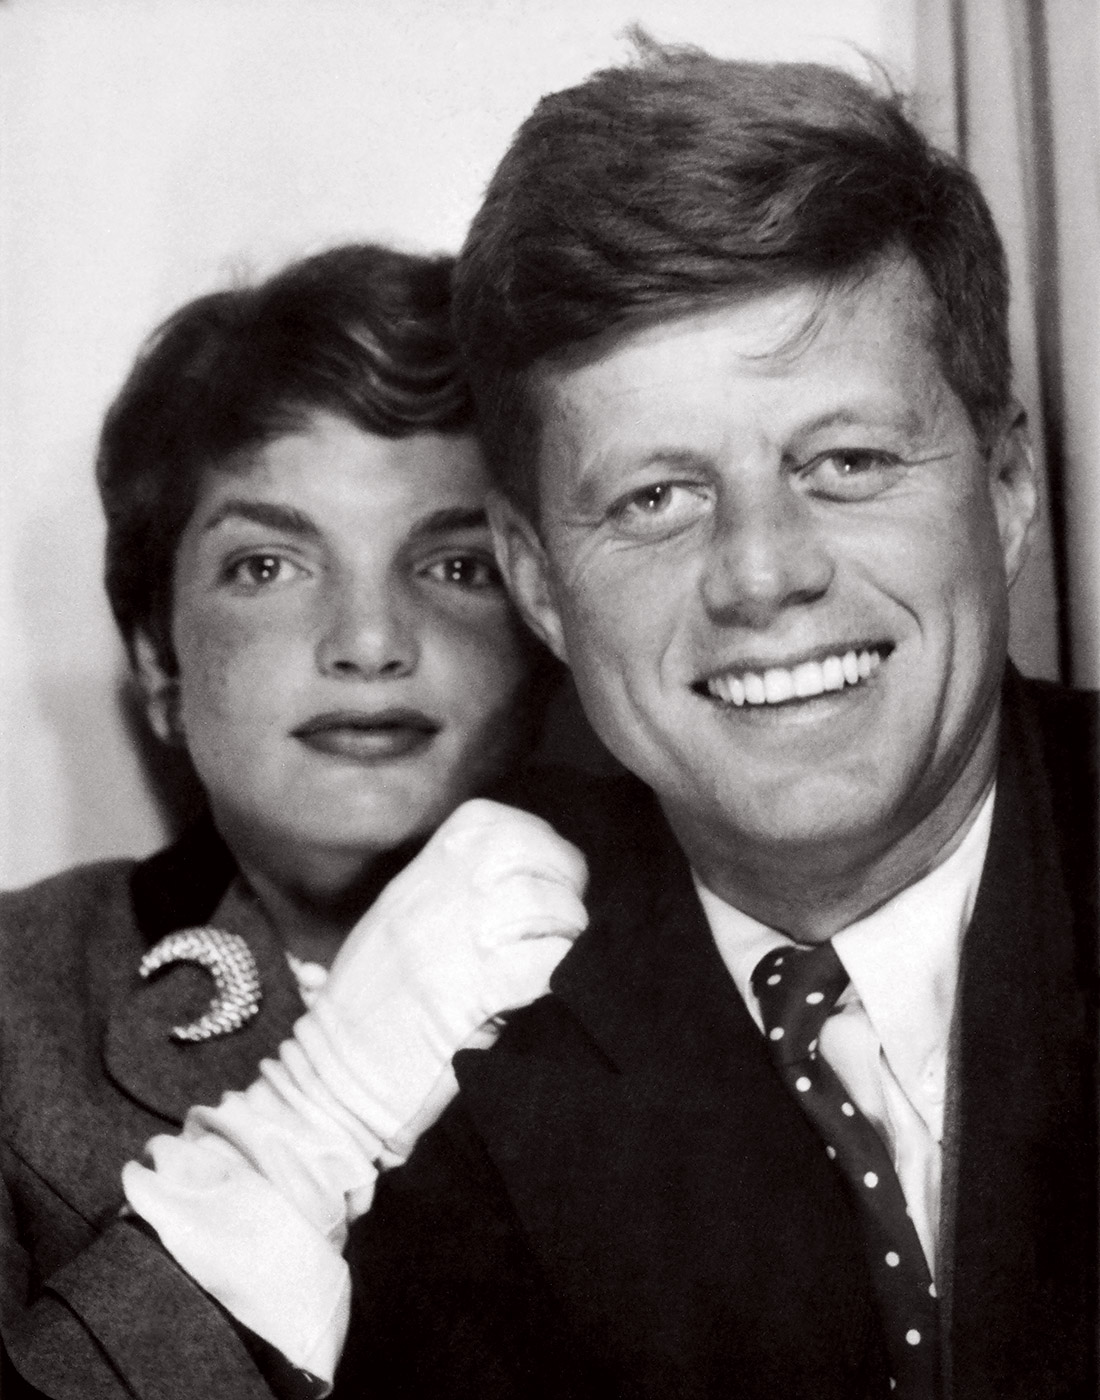 John F. Kennedy and Jackie Kennedy photo booth portrait.